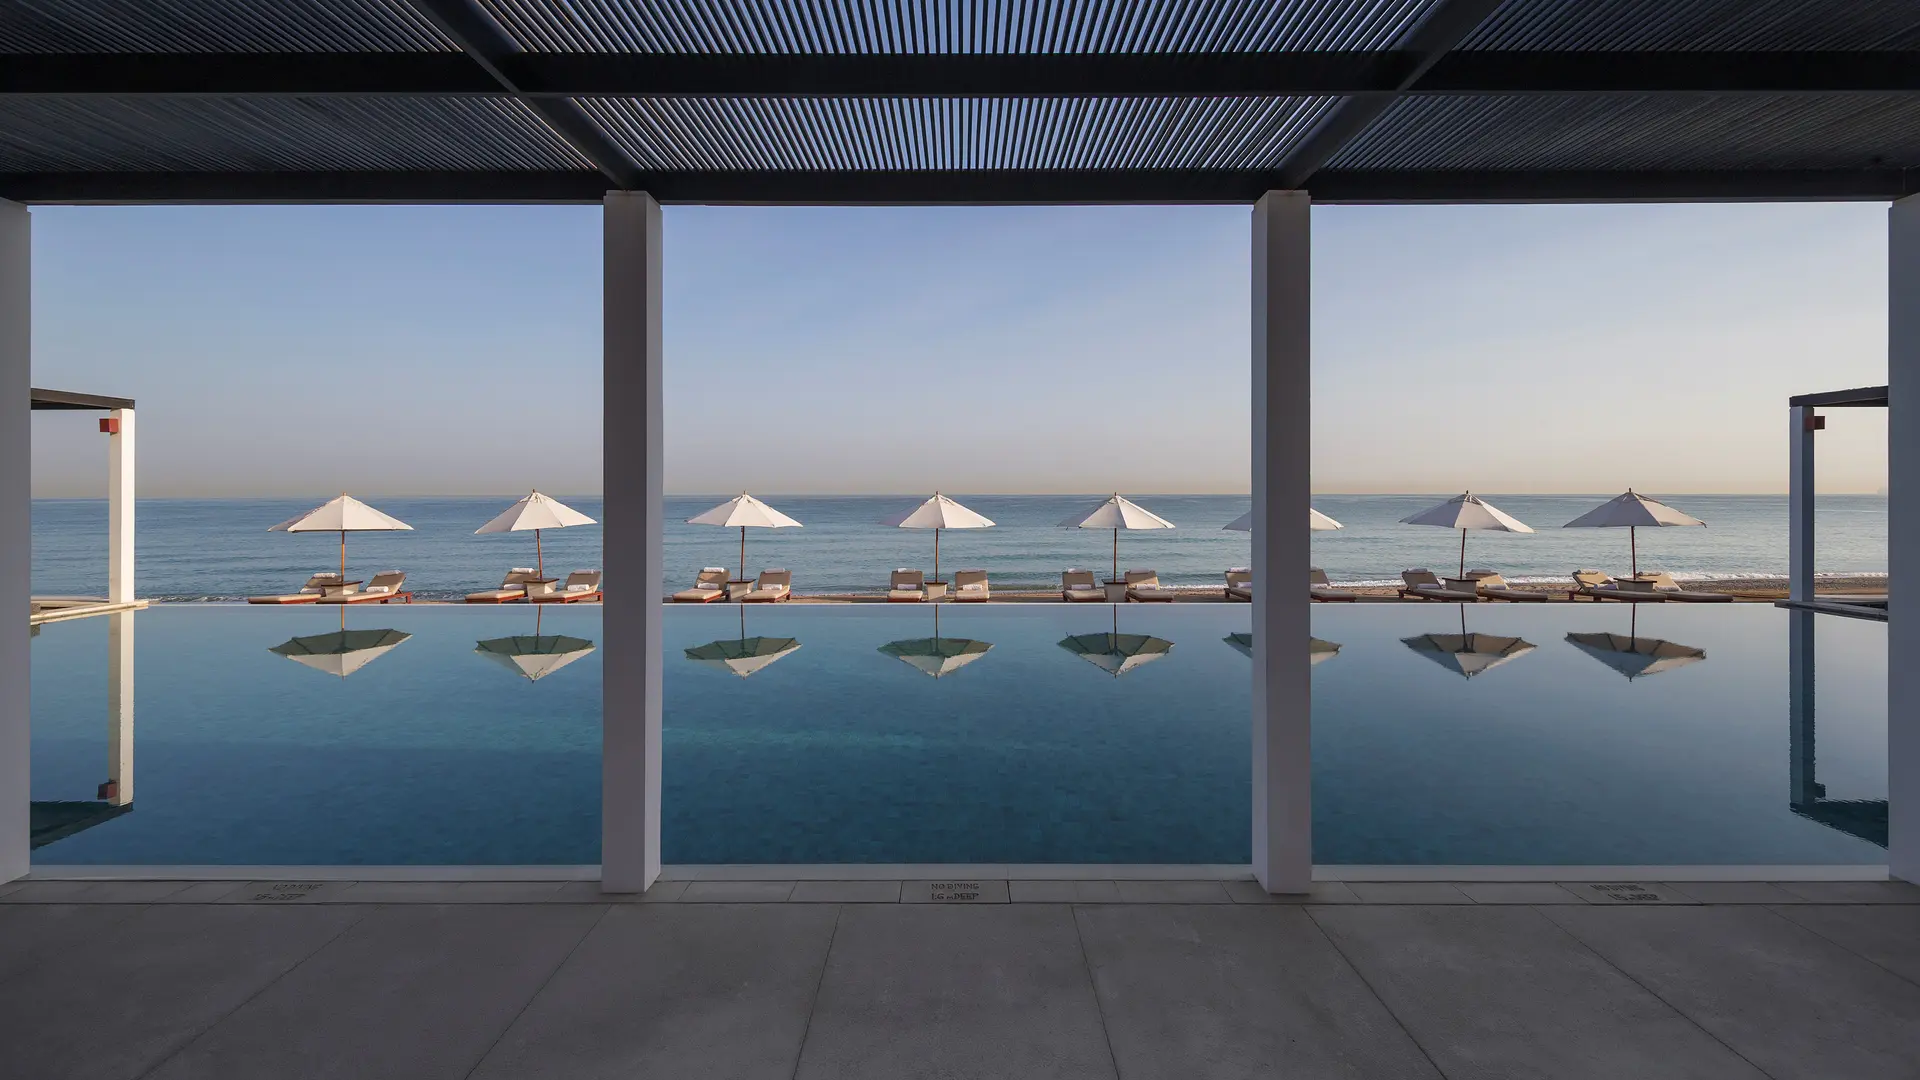 Hotels Toplists - The Best Infinity Swimming Pools